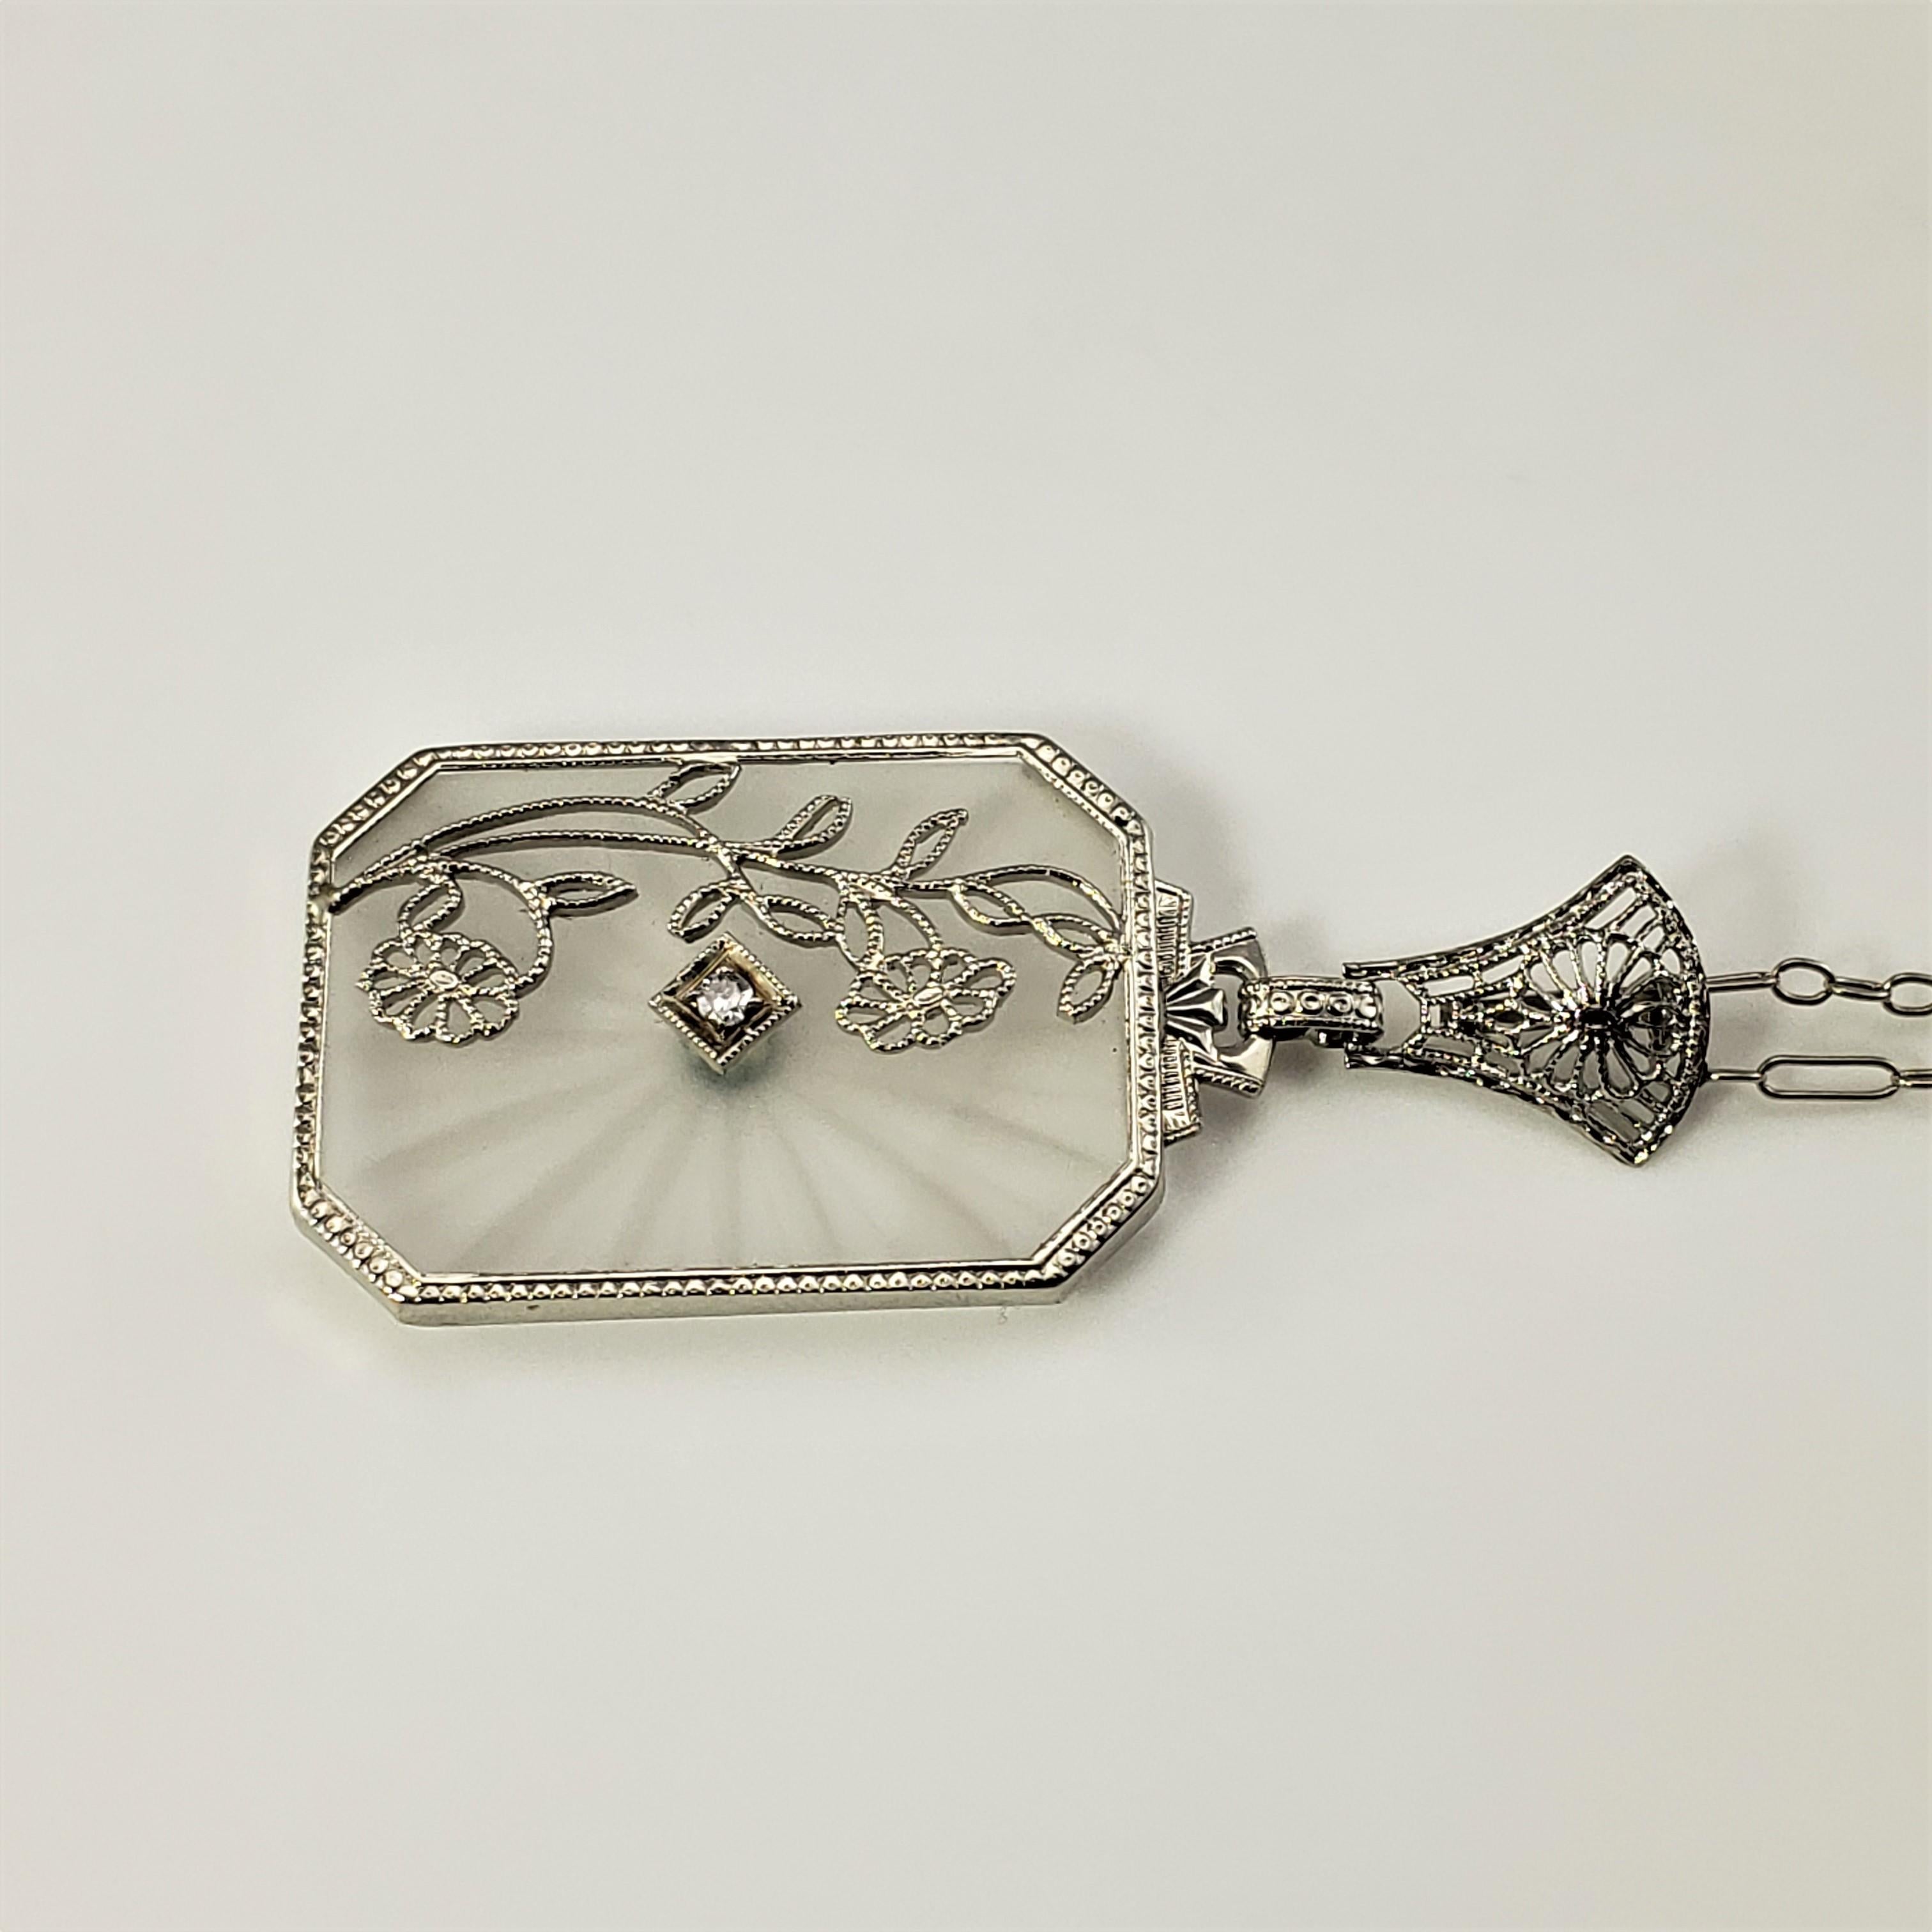 Art Deco 14 Karat White Gold and Camphor Glass Lavalier Pendant with Diamond Necklace-

This lovely 14K white gold filigree and camphor glass floral pendant features one round single cut diamond and suspends from an elegant white gold